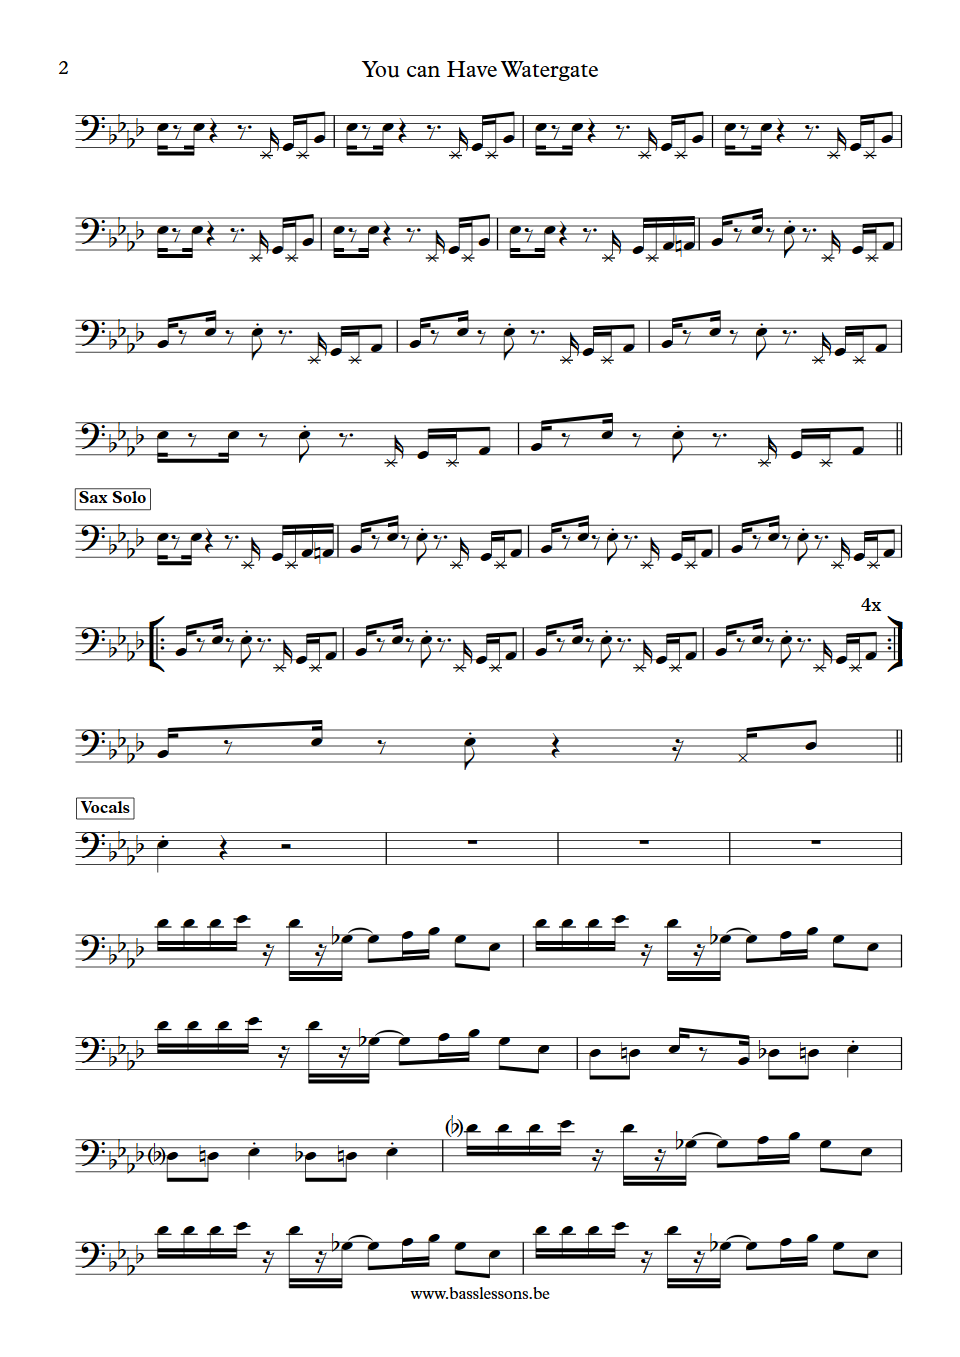 You can have watergate - Bass Transcription